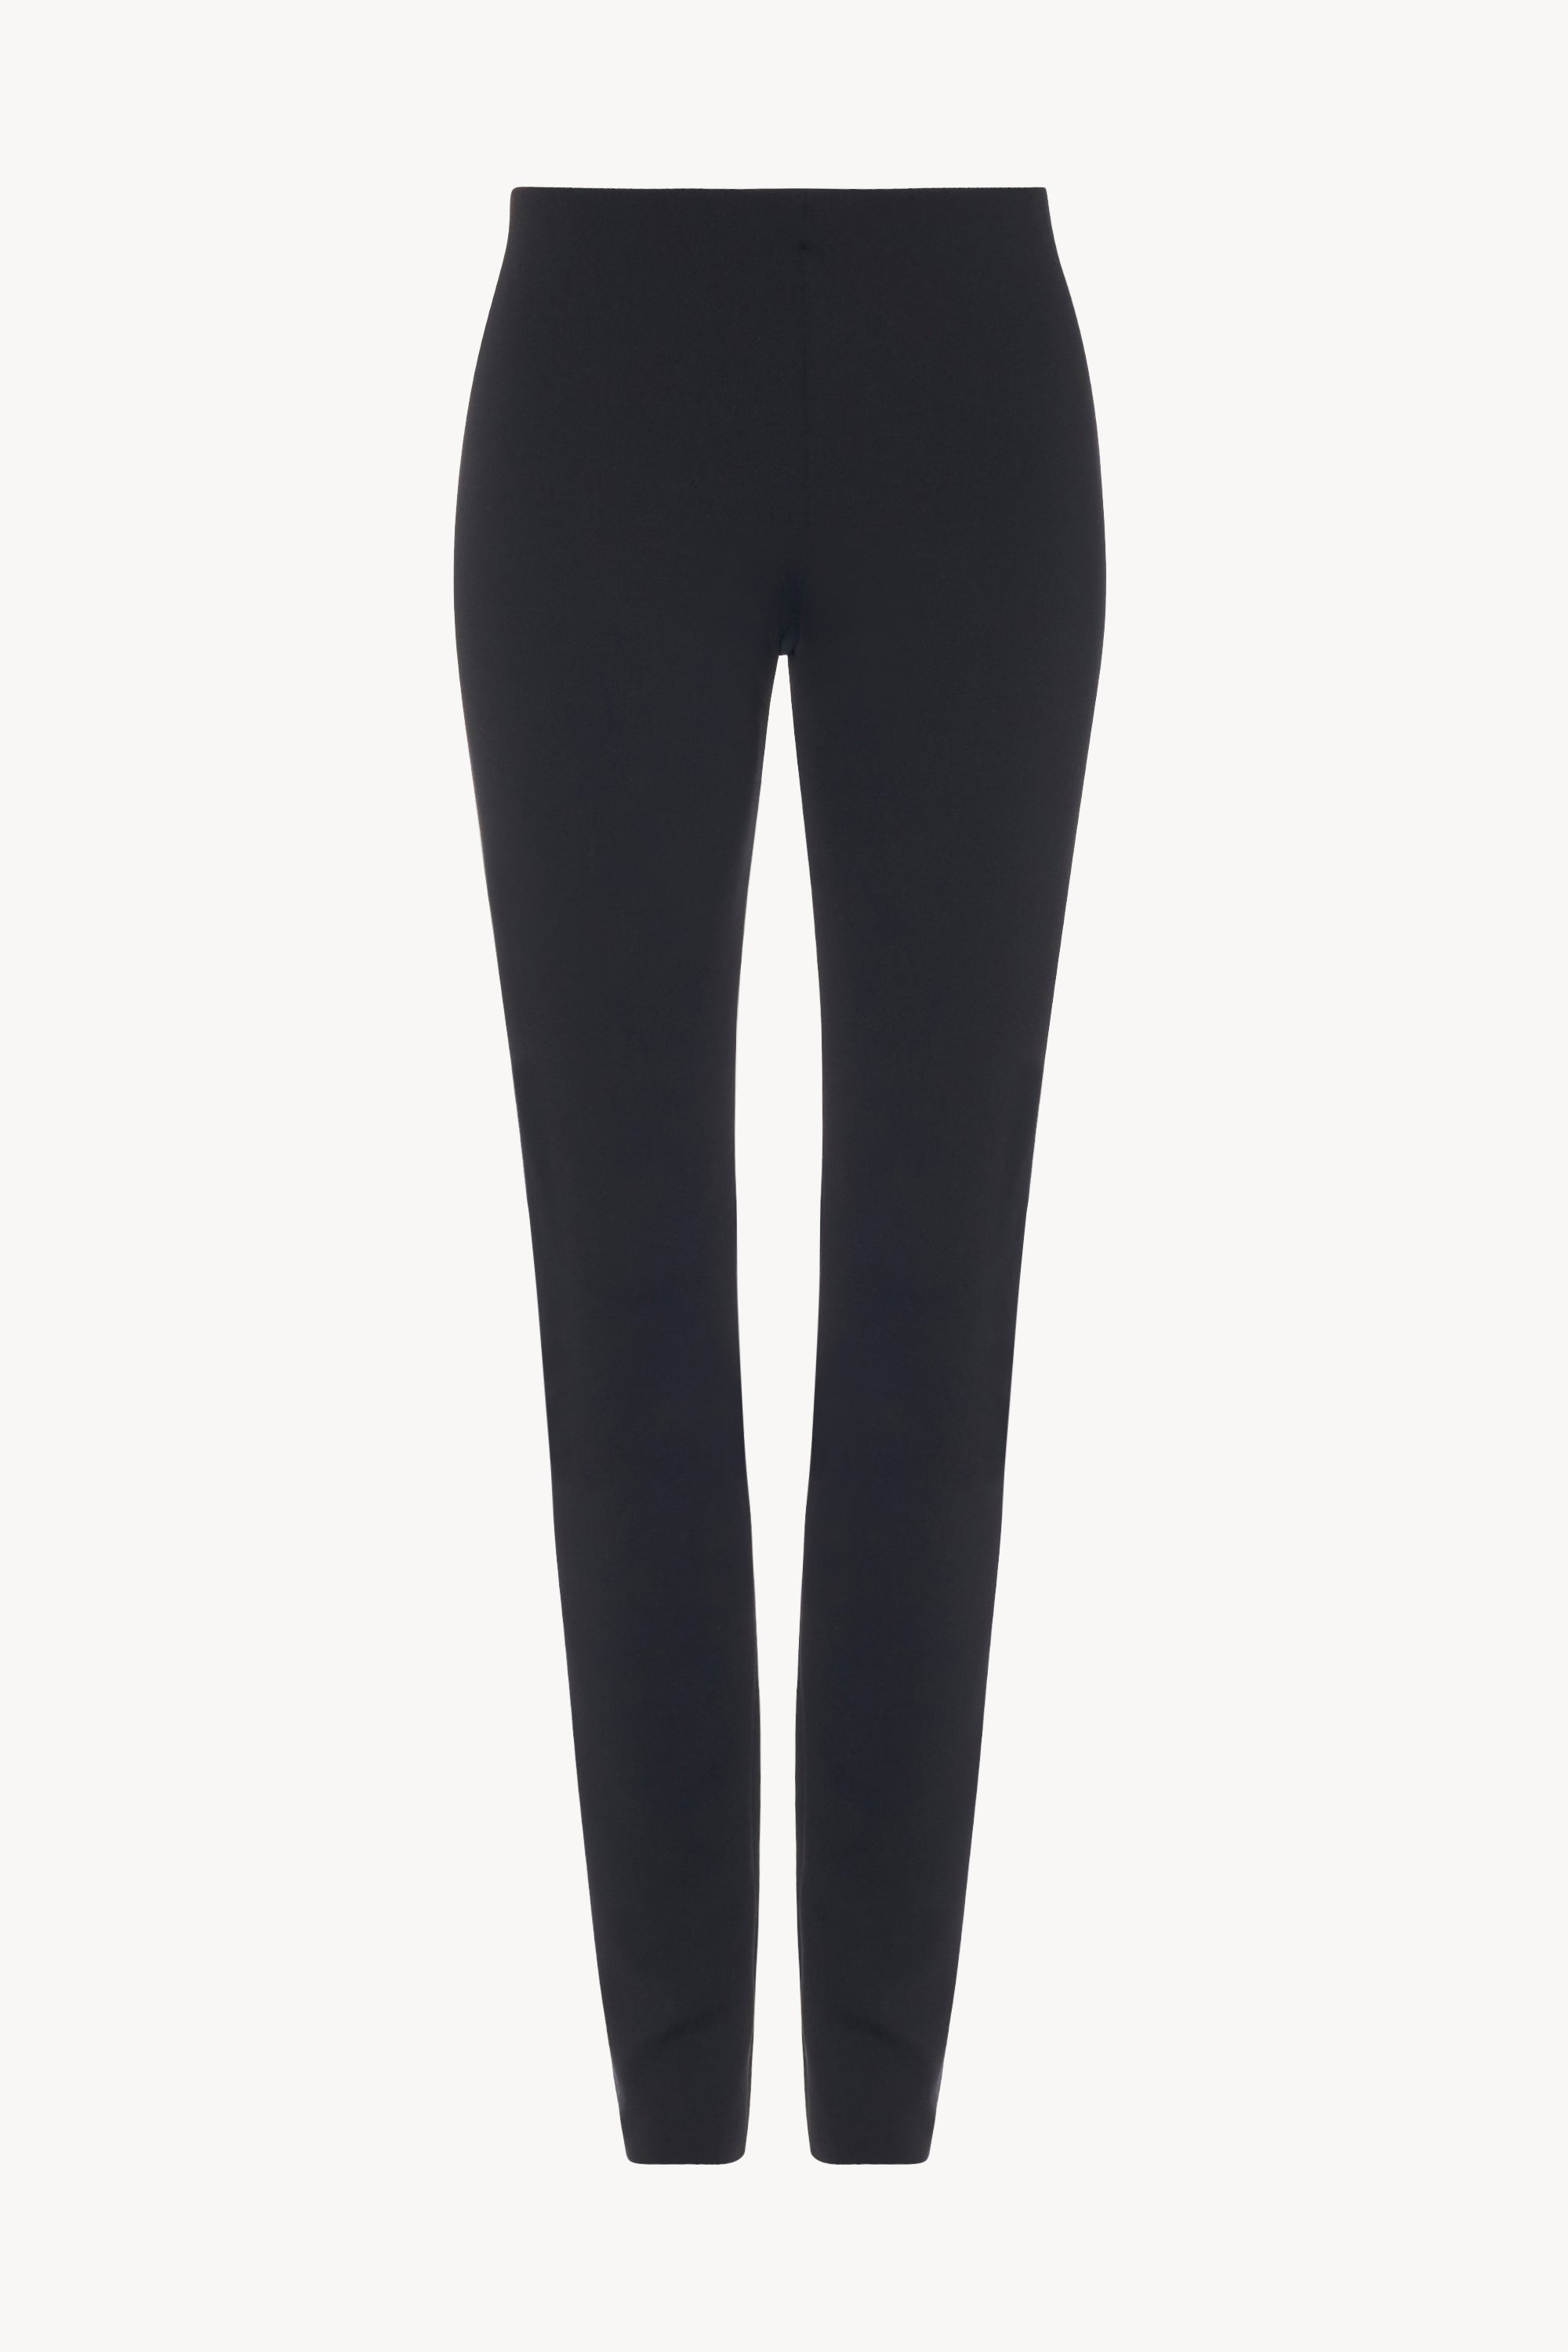 Woolworth Pant in Scuba - 1